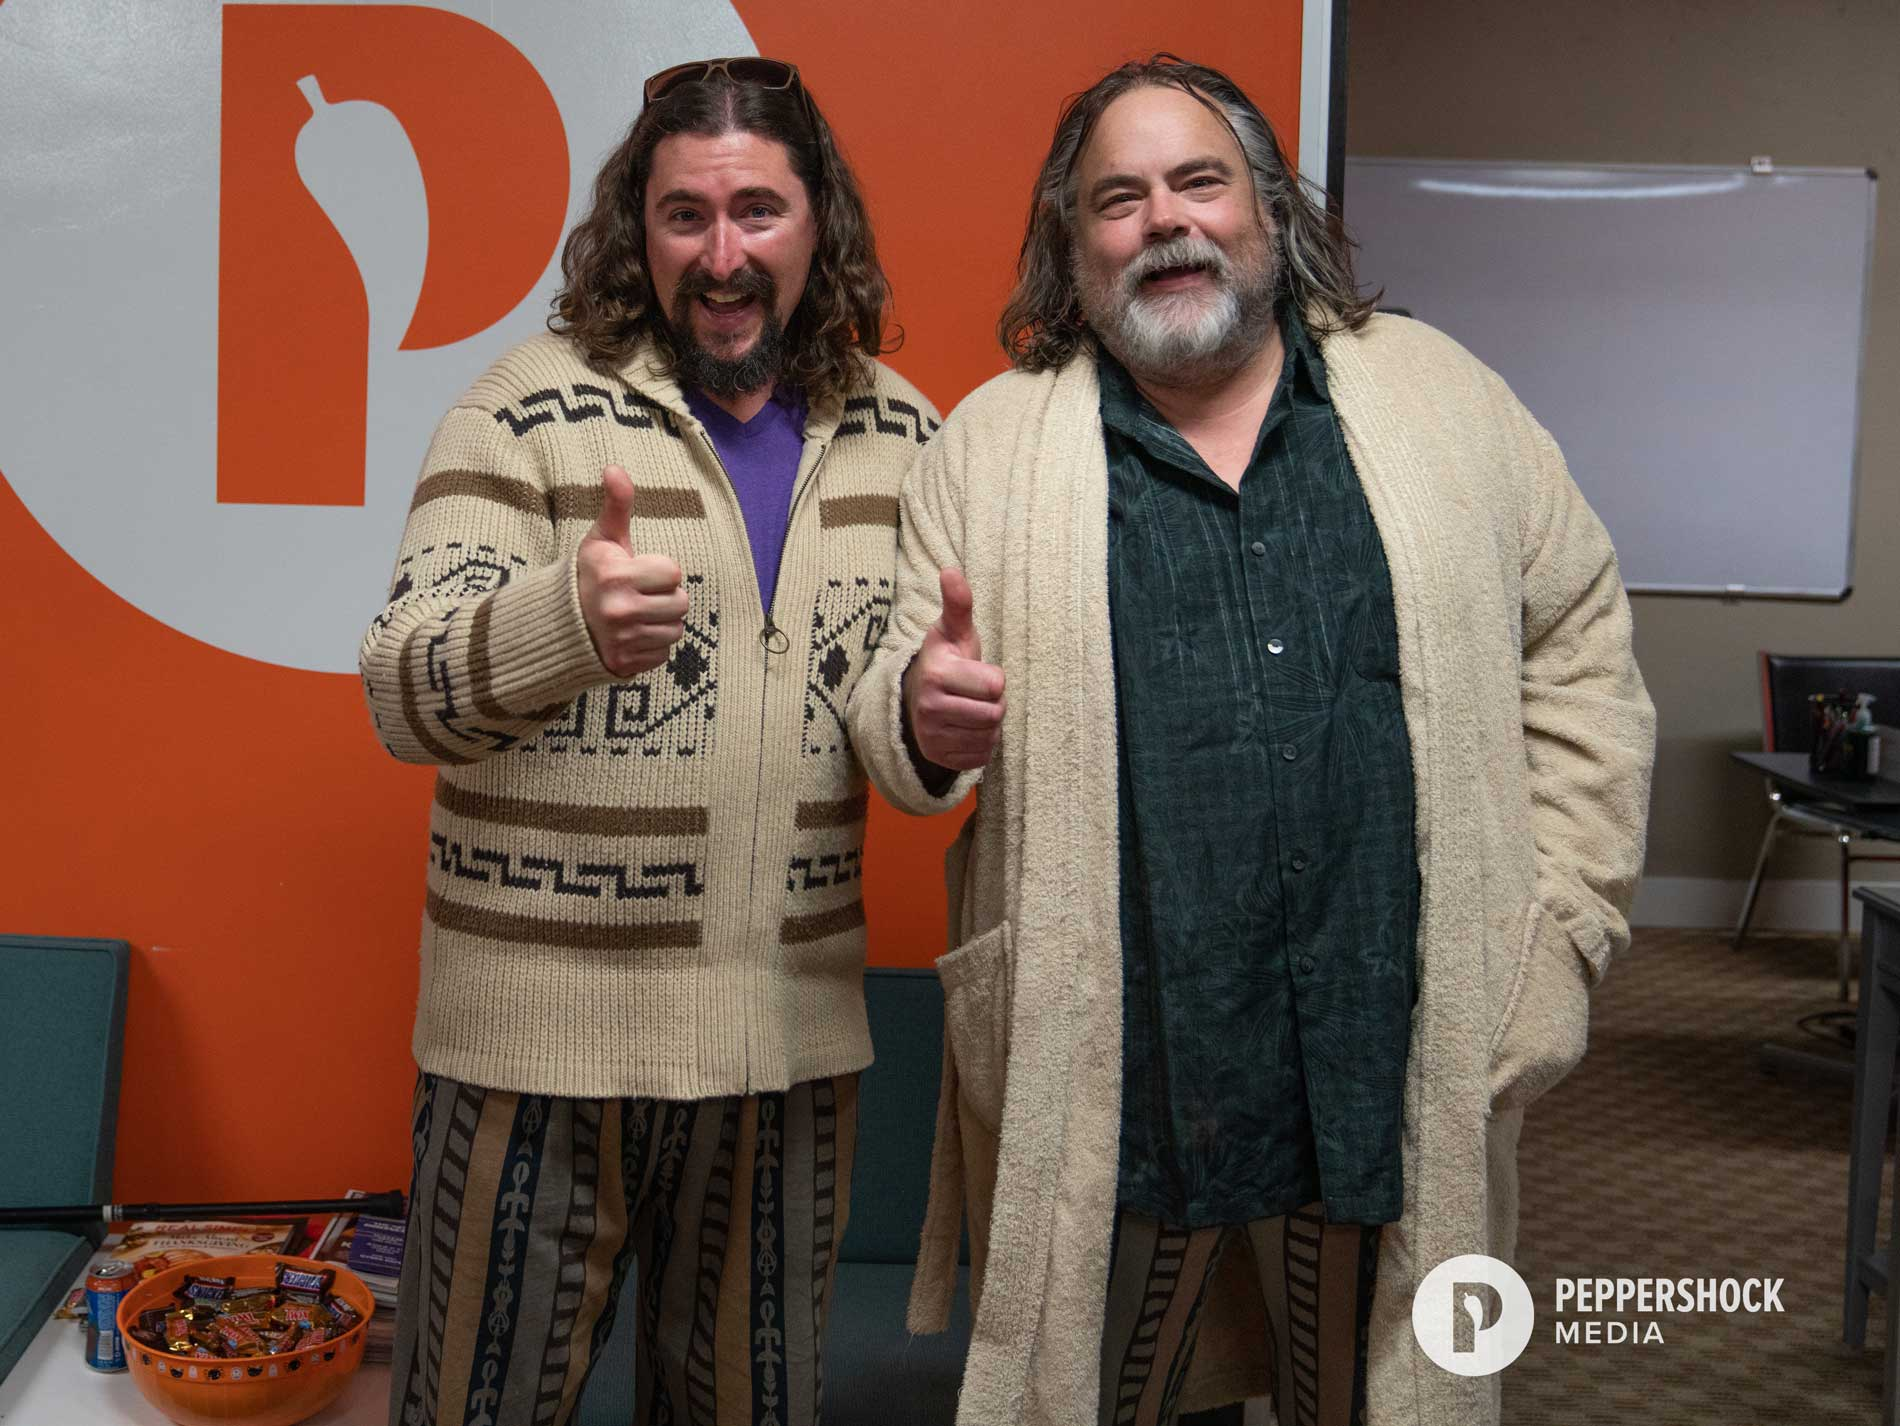 Lebowski Costume at Halloween Party with The Grilling Dude